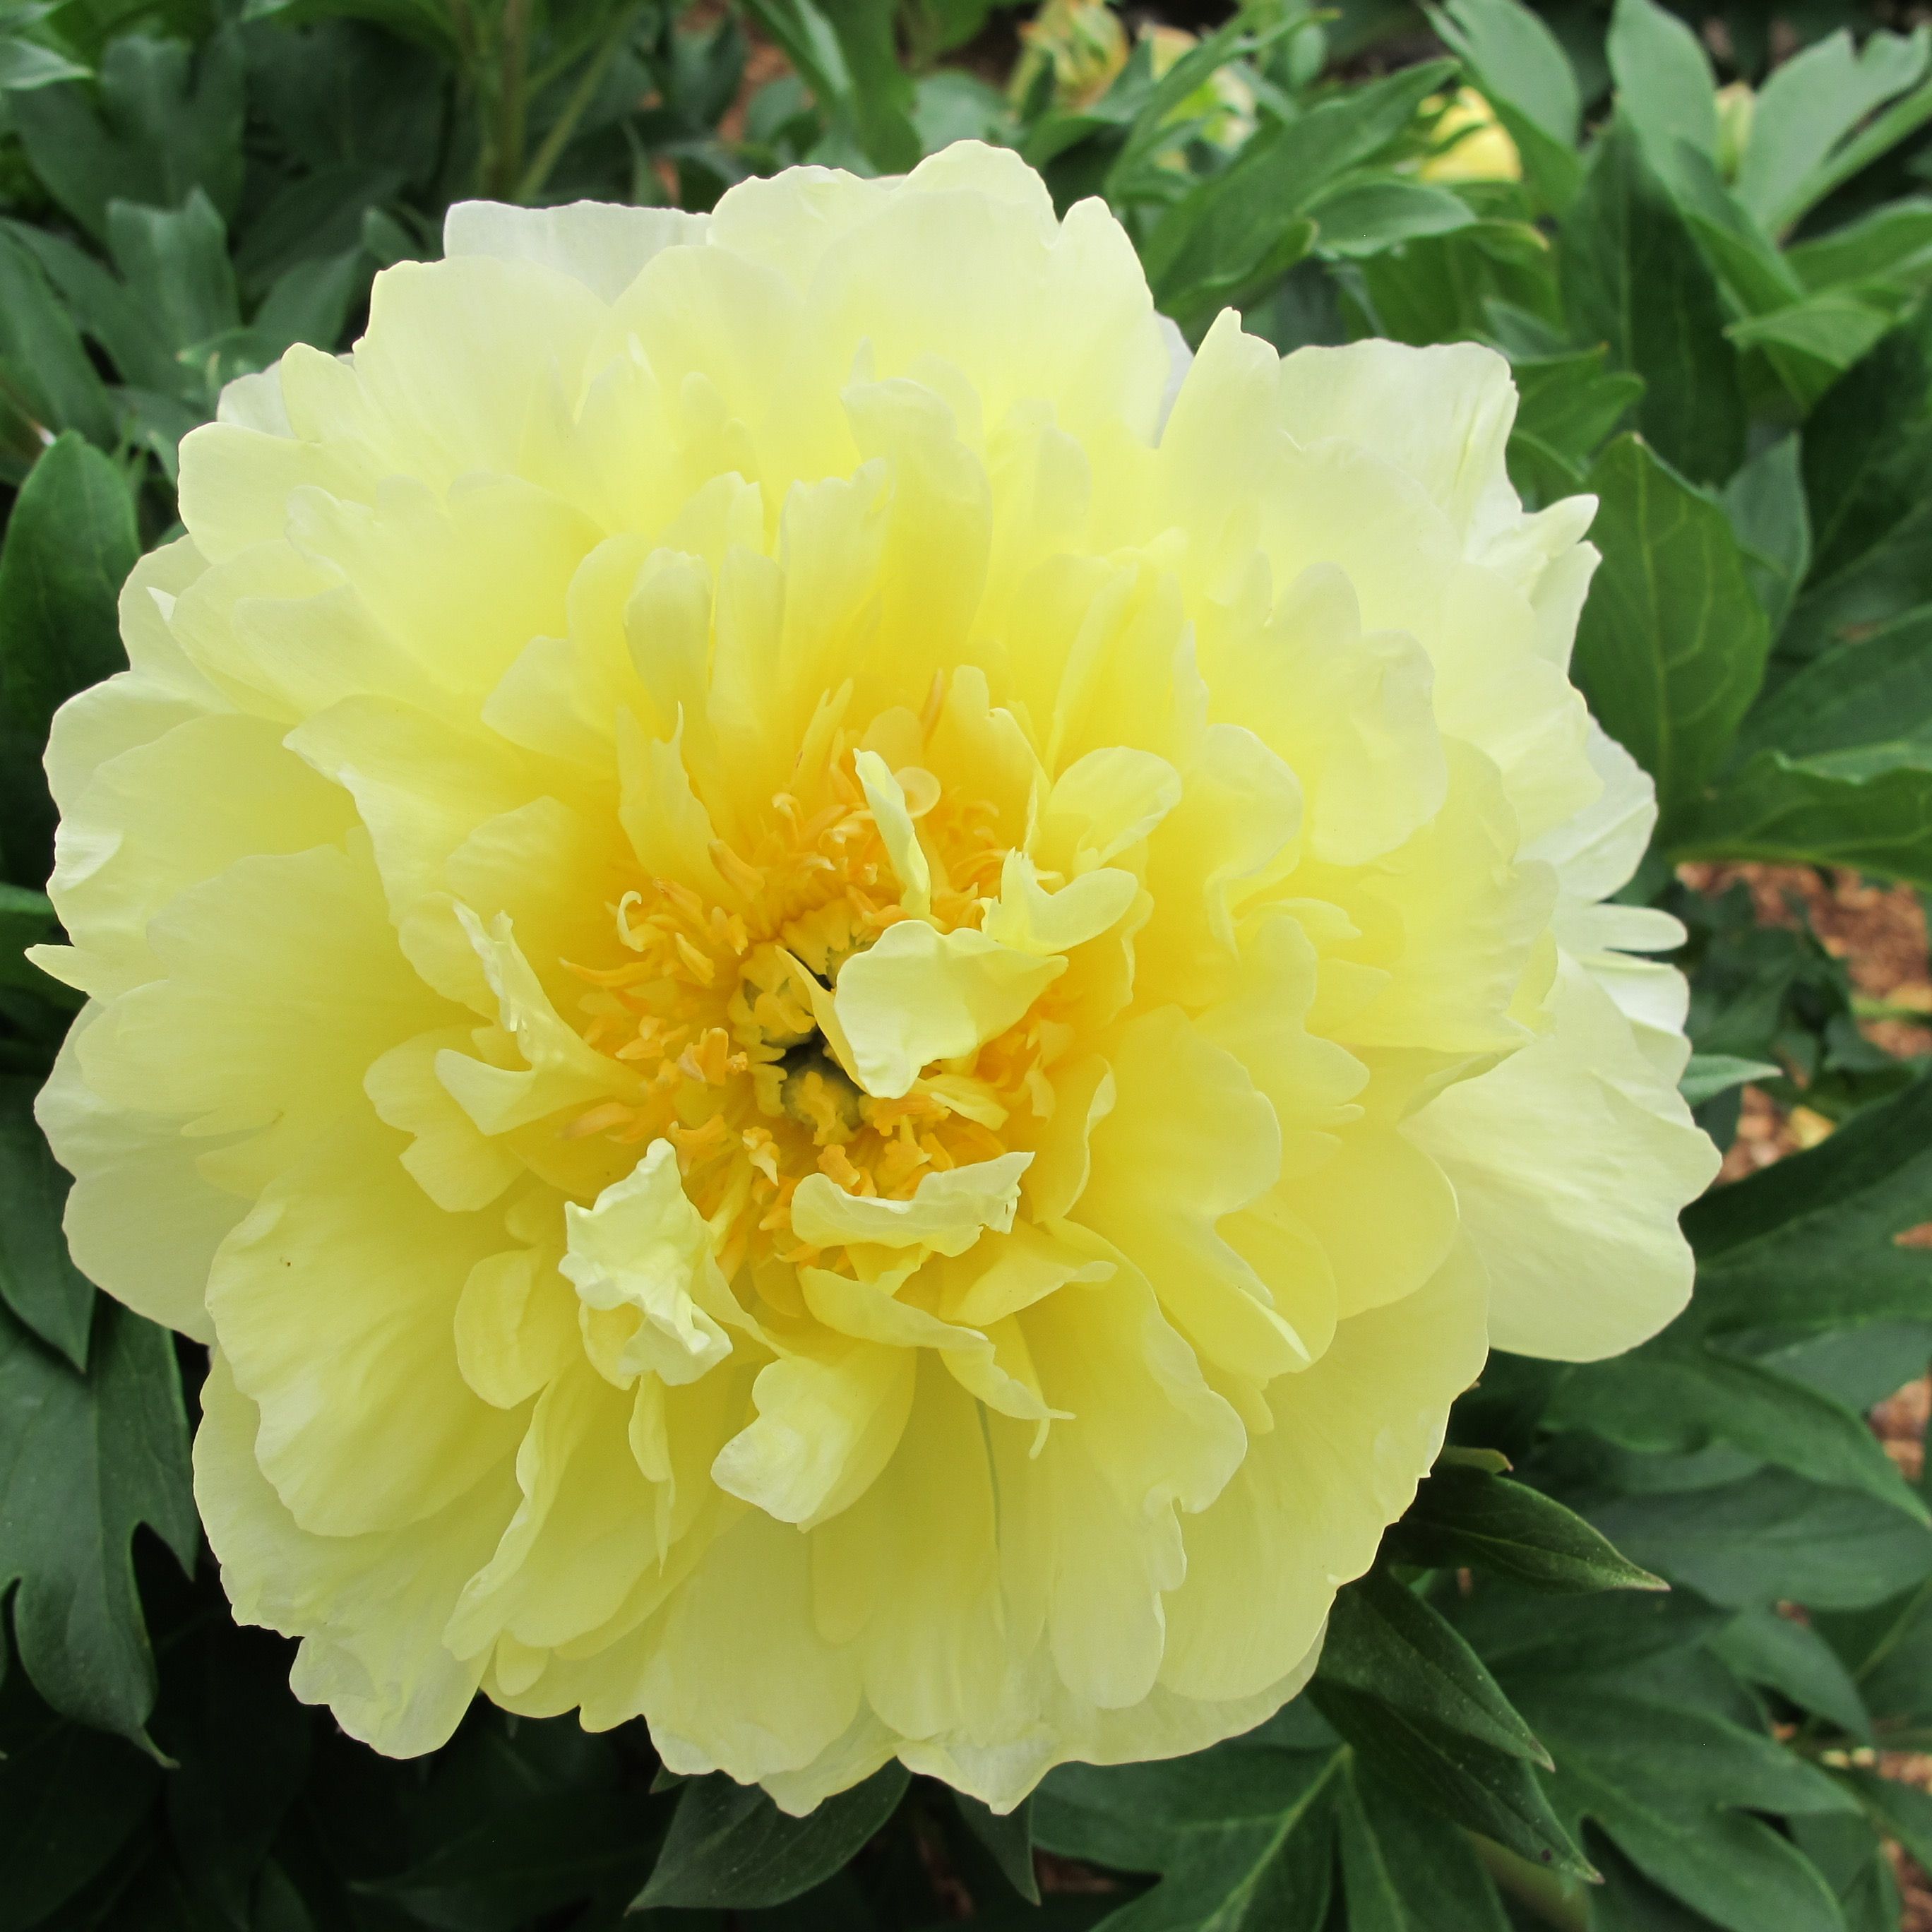 images/plants/paeonia/pae-golden-ticket/pae-golden-ticket-0003.JPG